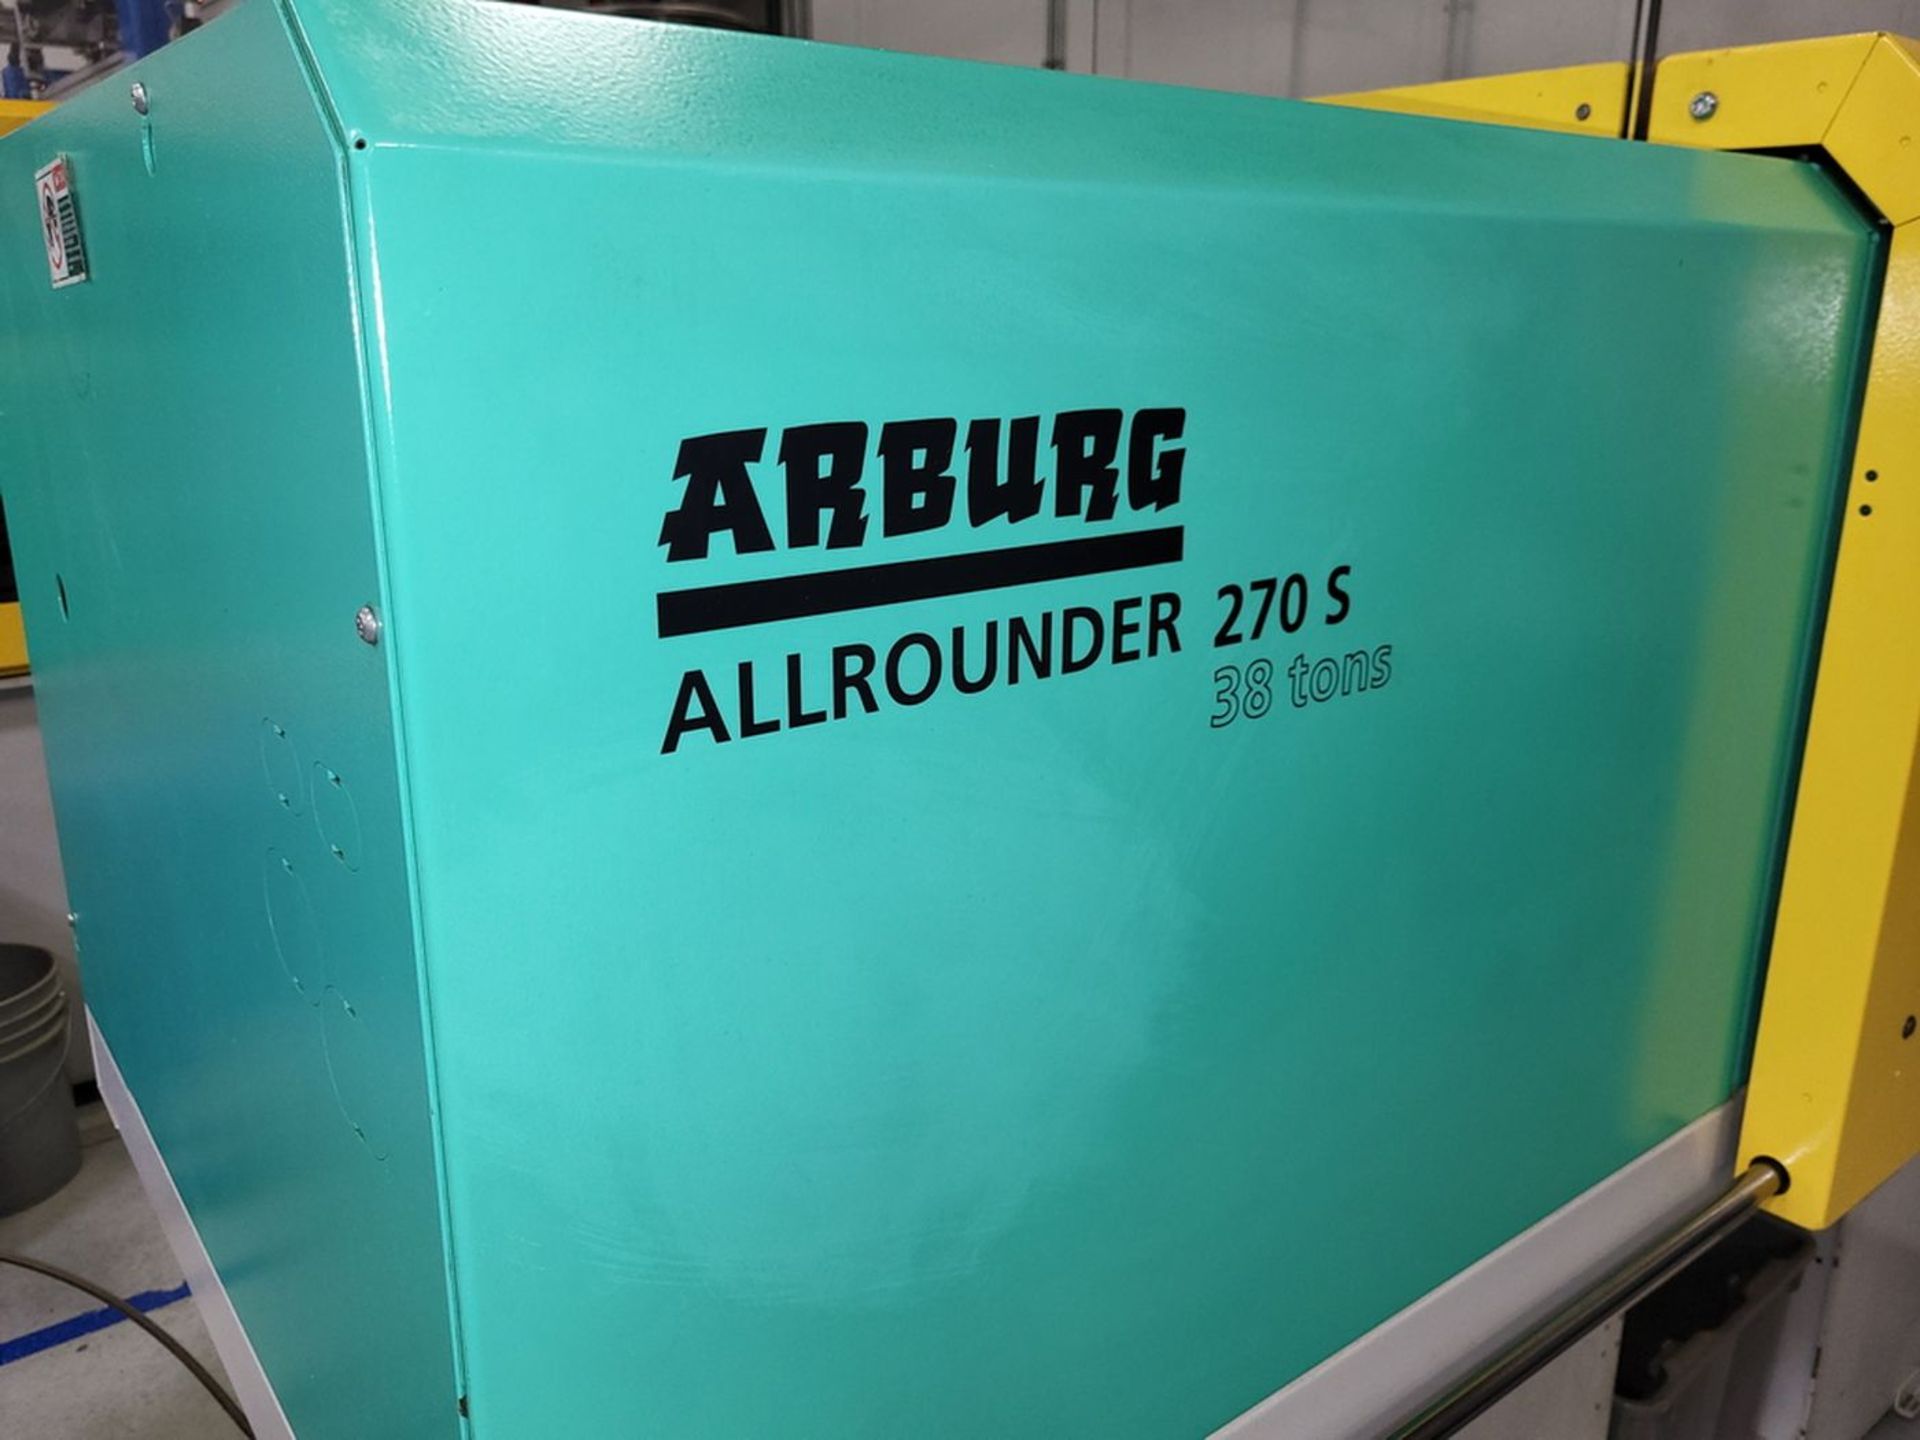 Arburg 38-Ton Cap. Allrounder 270S 350-70 Hydraulic Injection Molding Machine, S/N: 218940 (2011); - Image 15 of 15